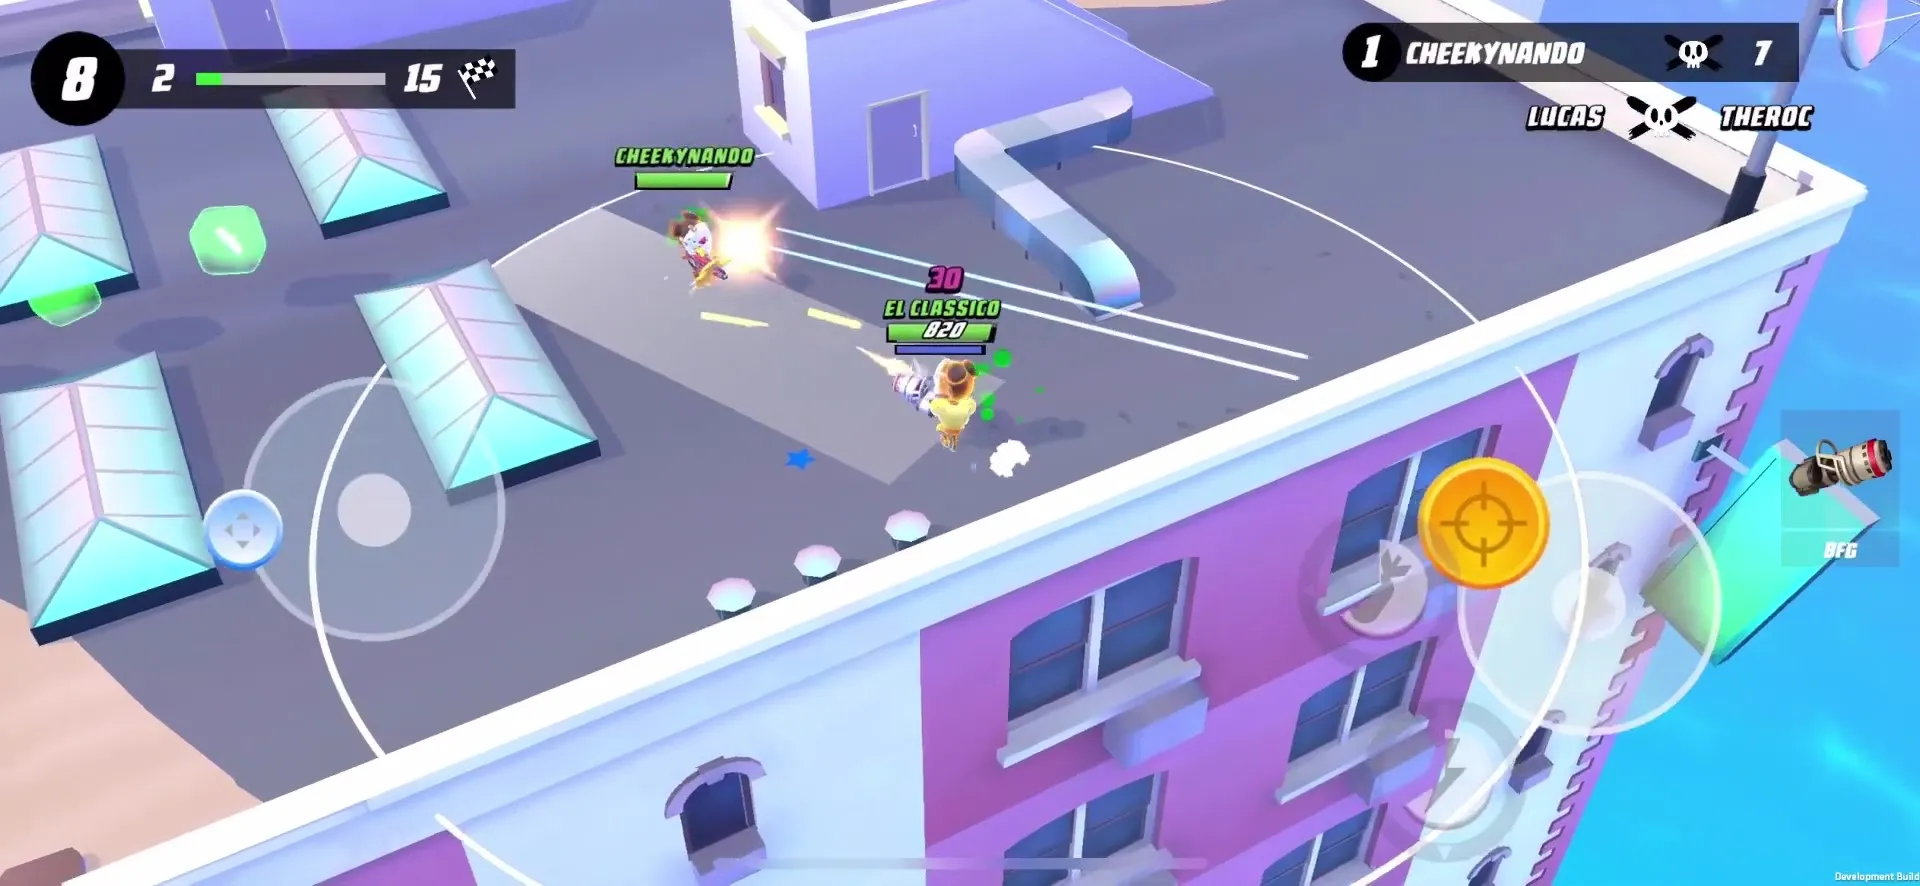 Blast Royale game screen showing characters battling it out at the top of a building. On the screen, the number of kills, character's health, and controls are shown.